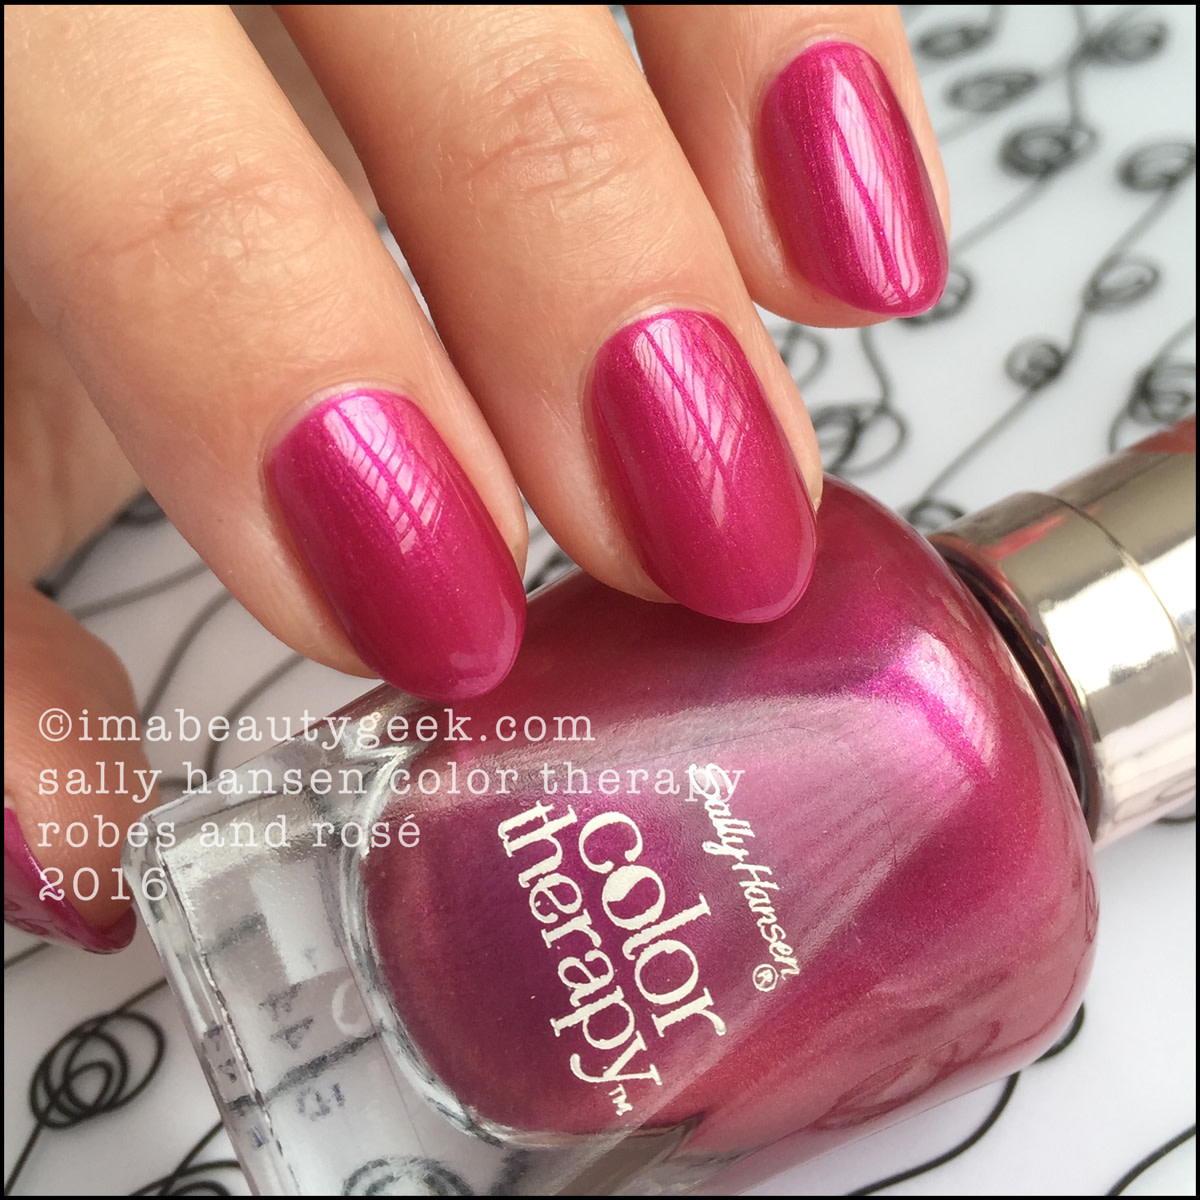 Sally Hansen Color Therapy Review and Swatches_Sally Hansen Robes and Rose Color Therapy